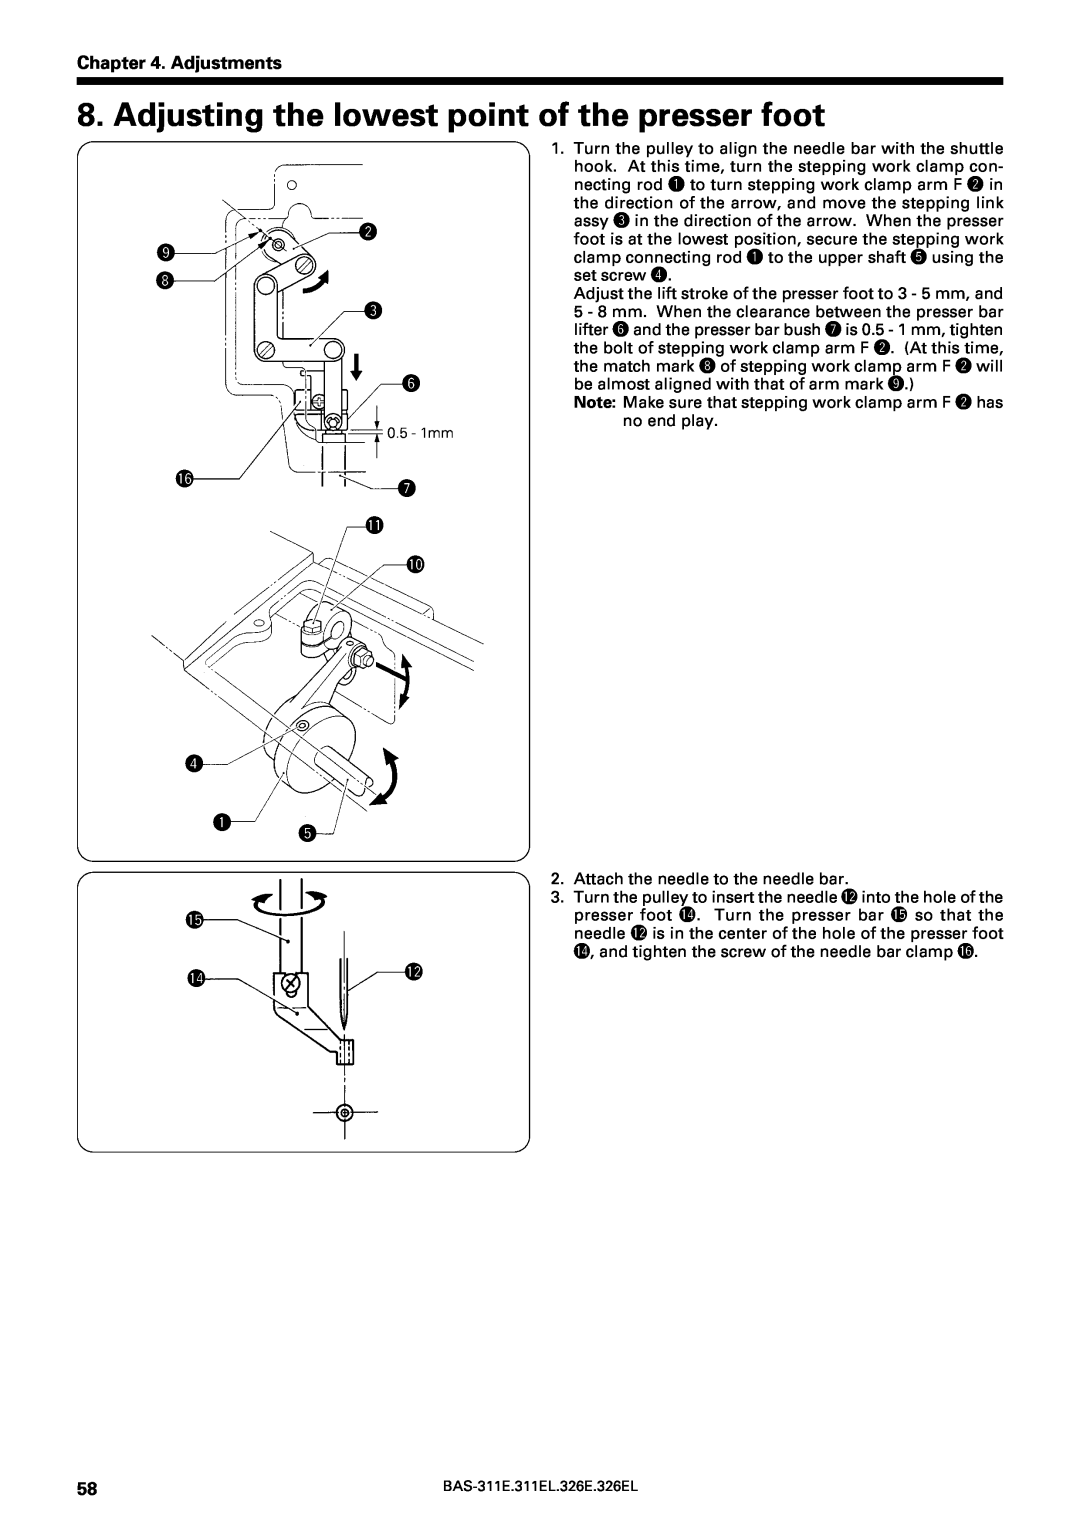 Brother BAS-311E service manual Adjusting the lowest point of the presser foot, Adjustments, w o e y, r q t 